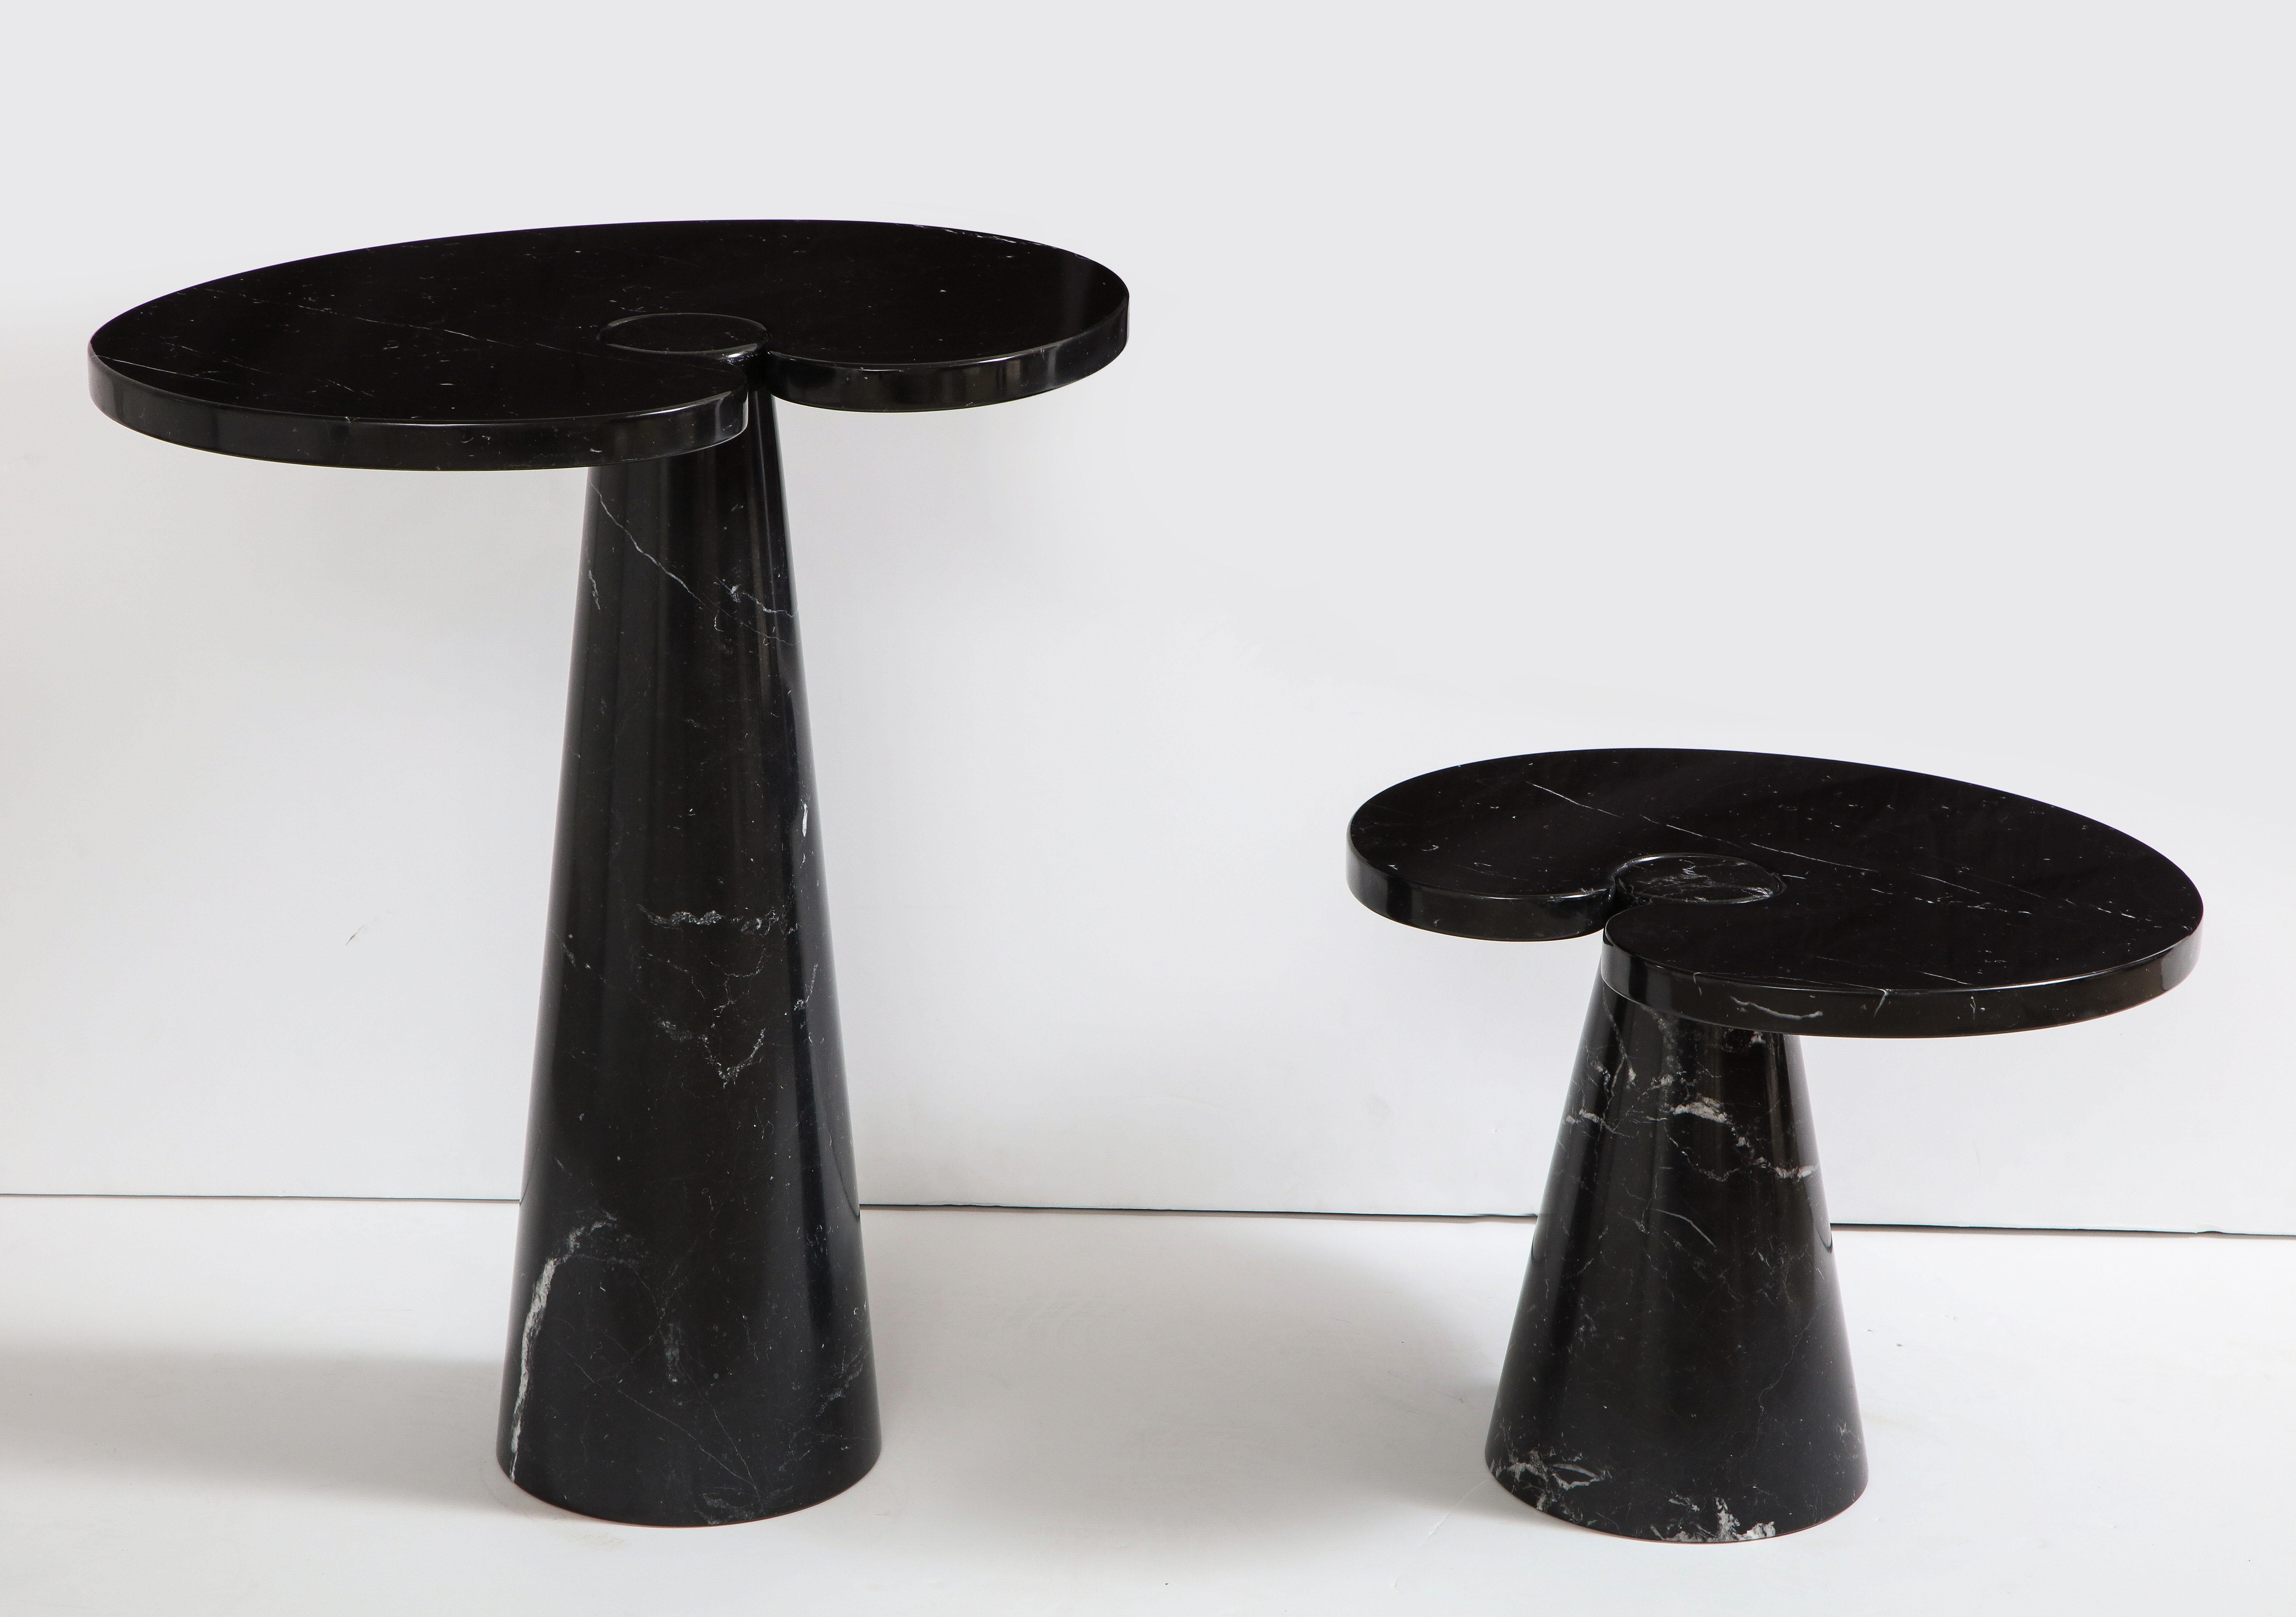 Polished Angelo Mangiarotti Black Marquina Marble Side Table from 'Eros' Series